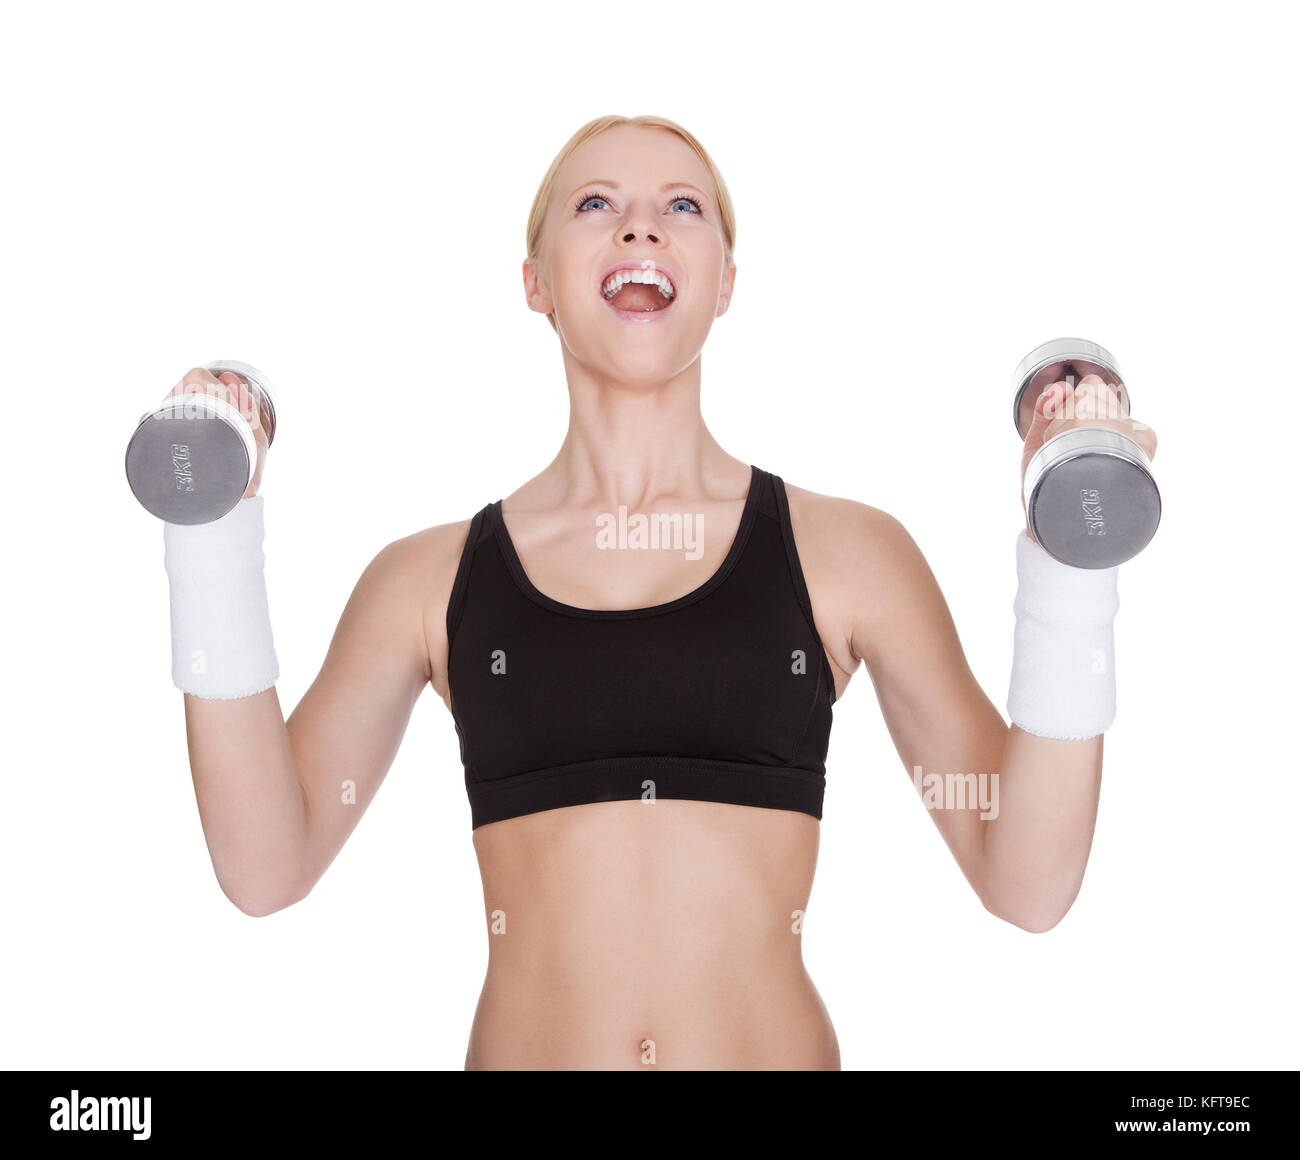 Beautiful young fitness woman doing weight training. Isolated on white Stock Photo